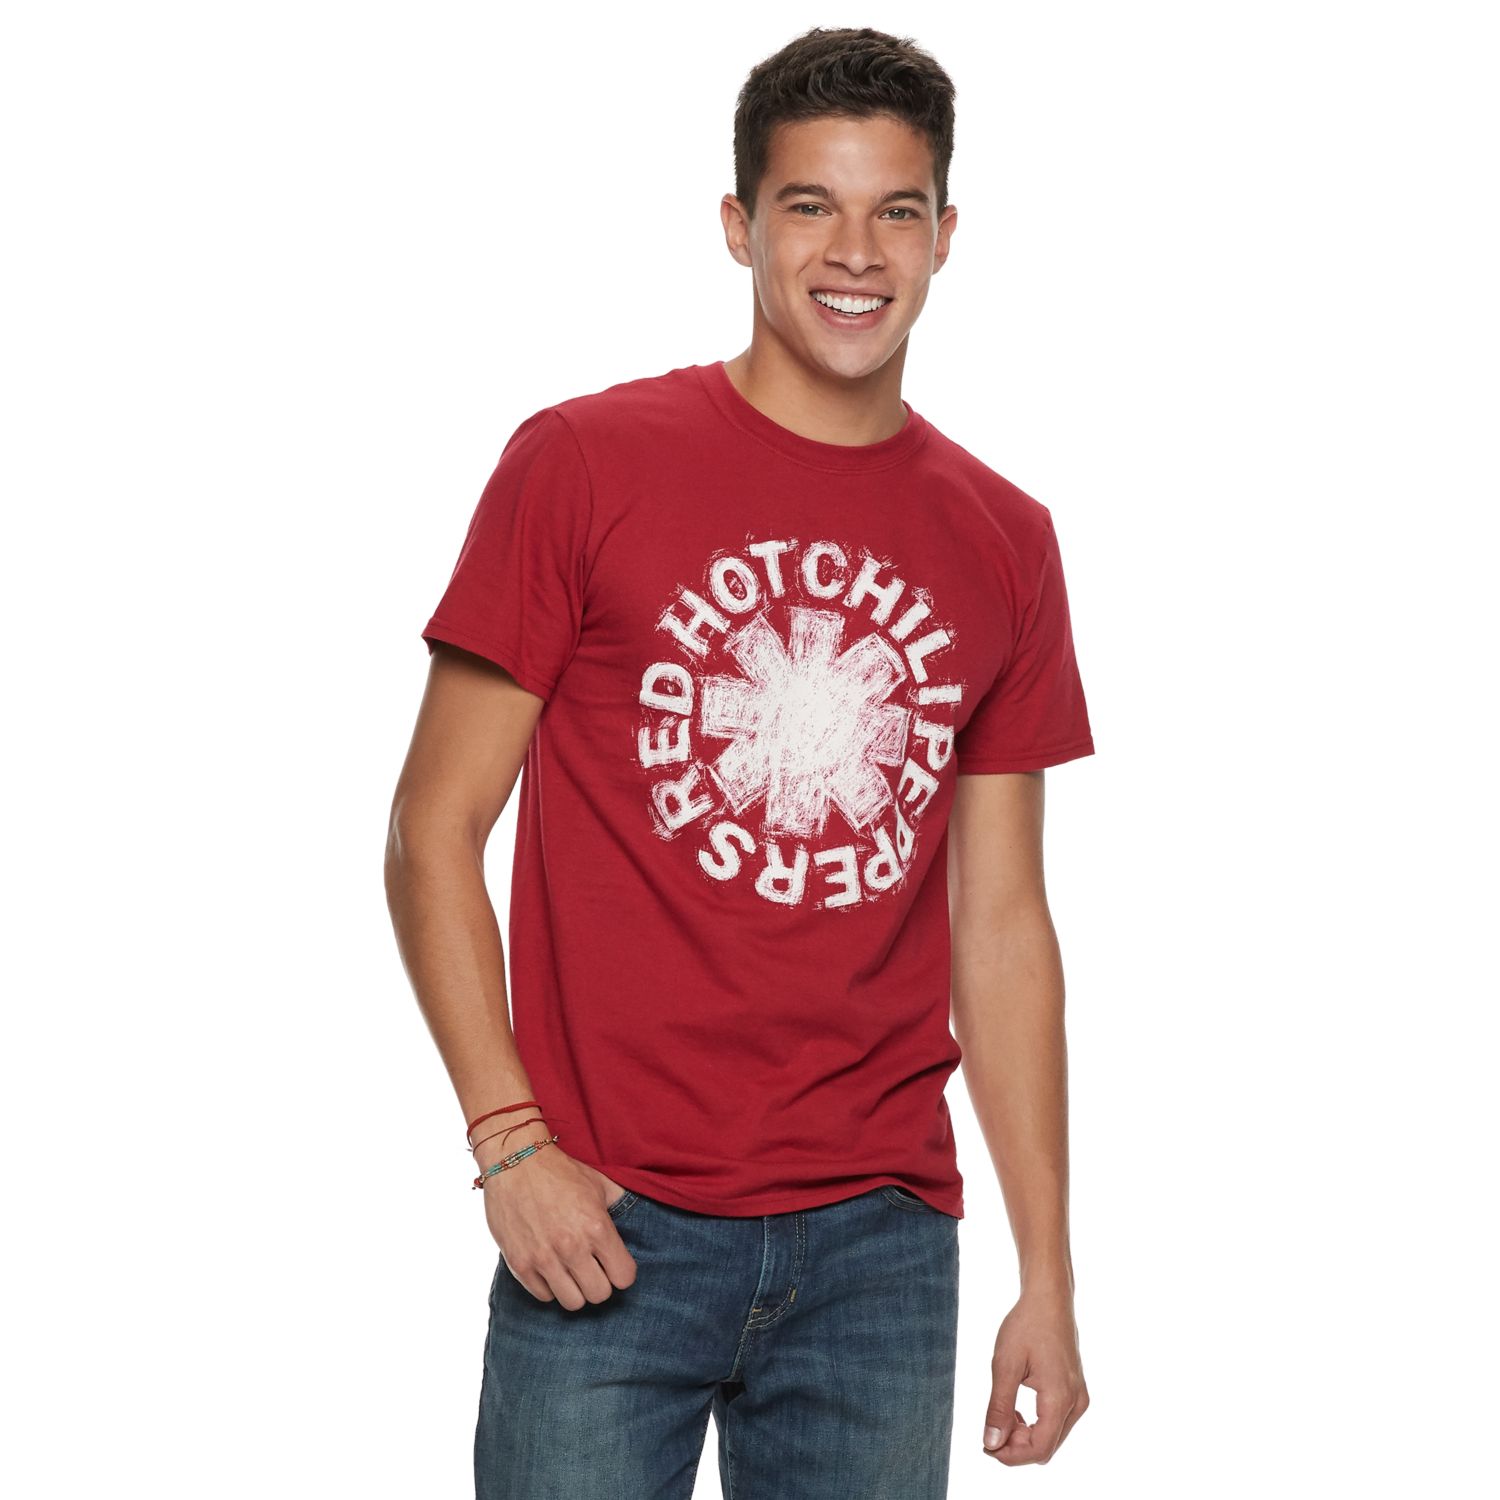 red hot chili peppers graphic tee